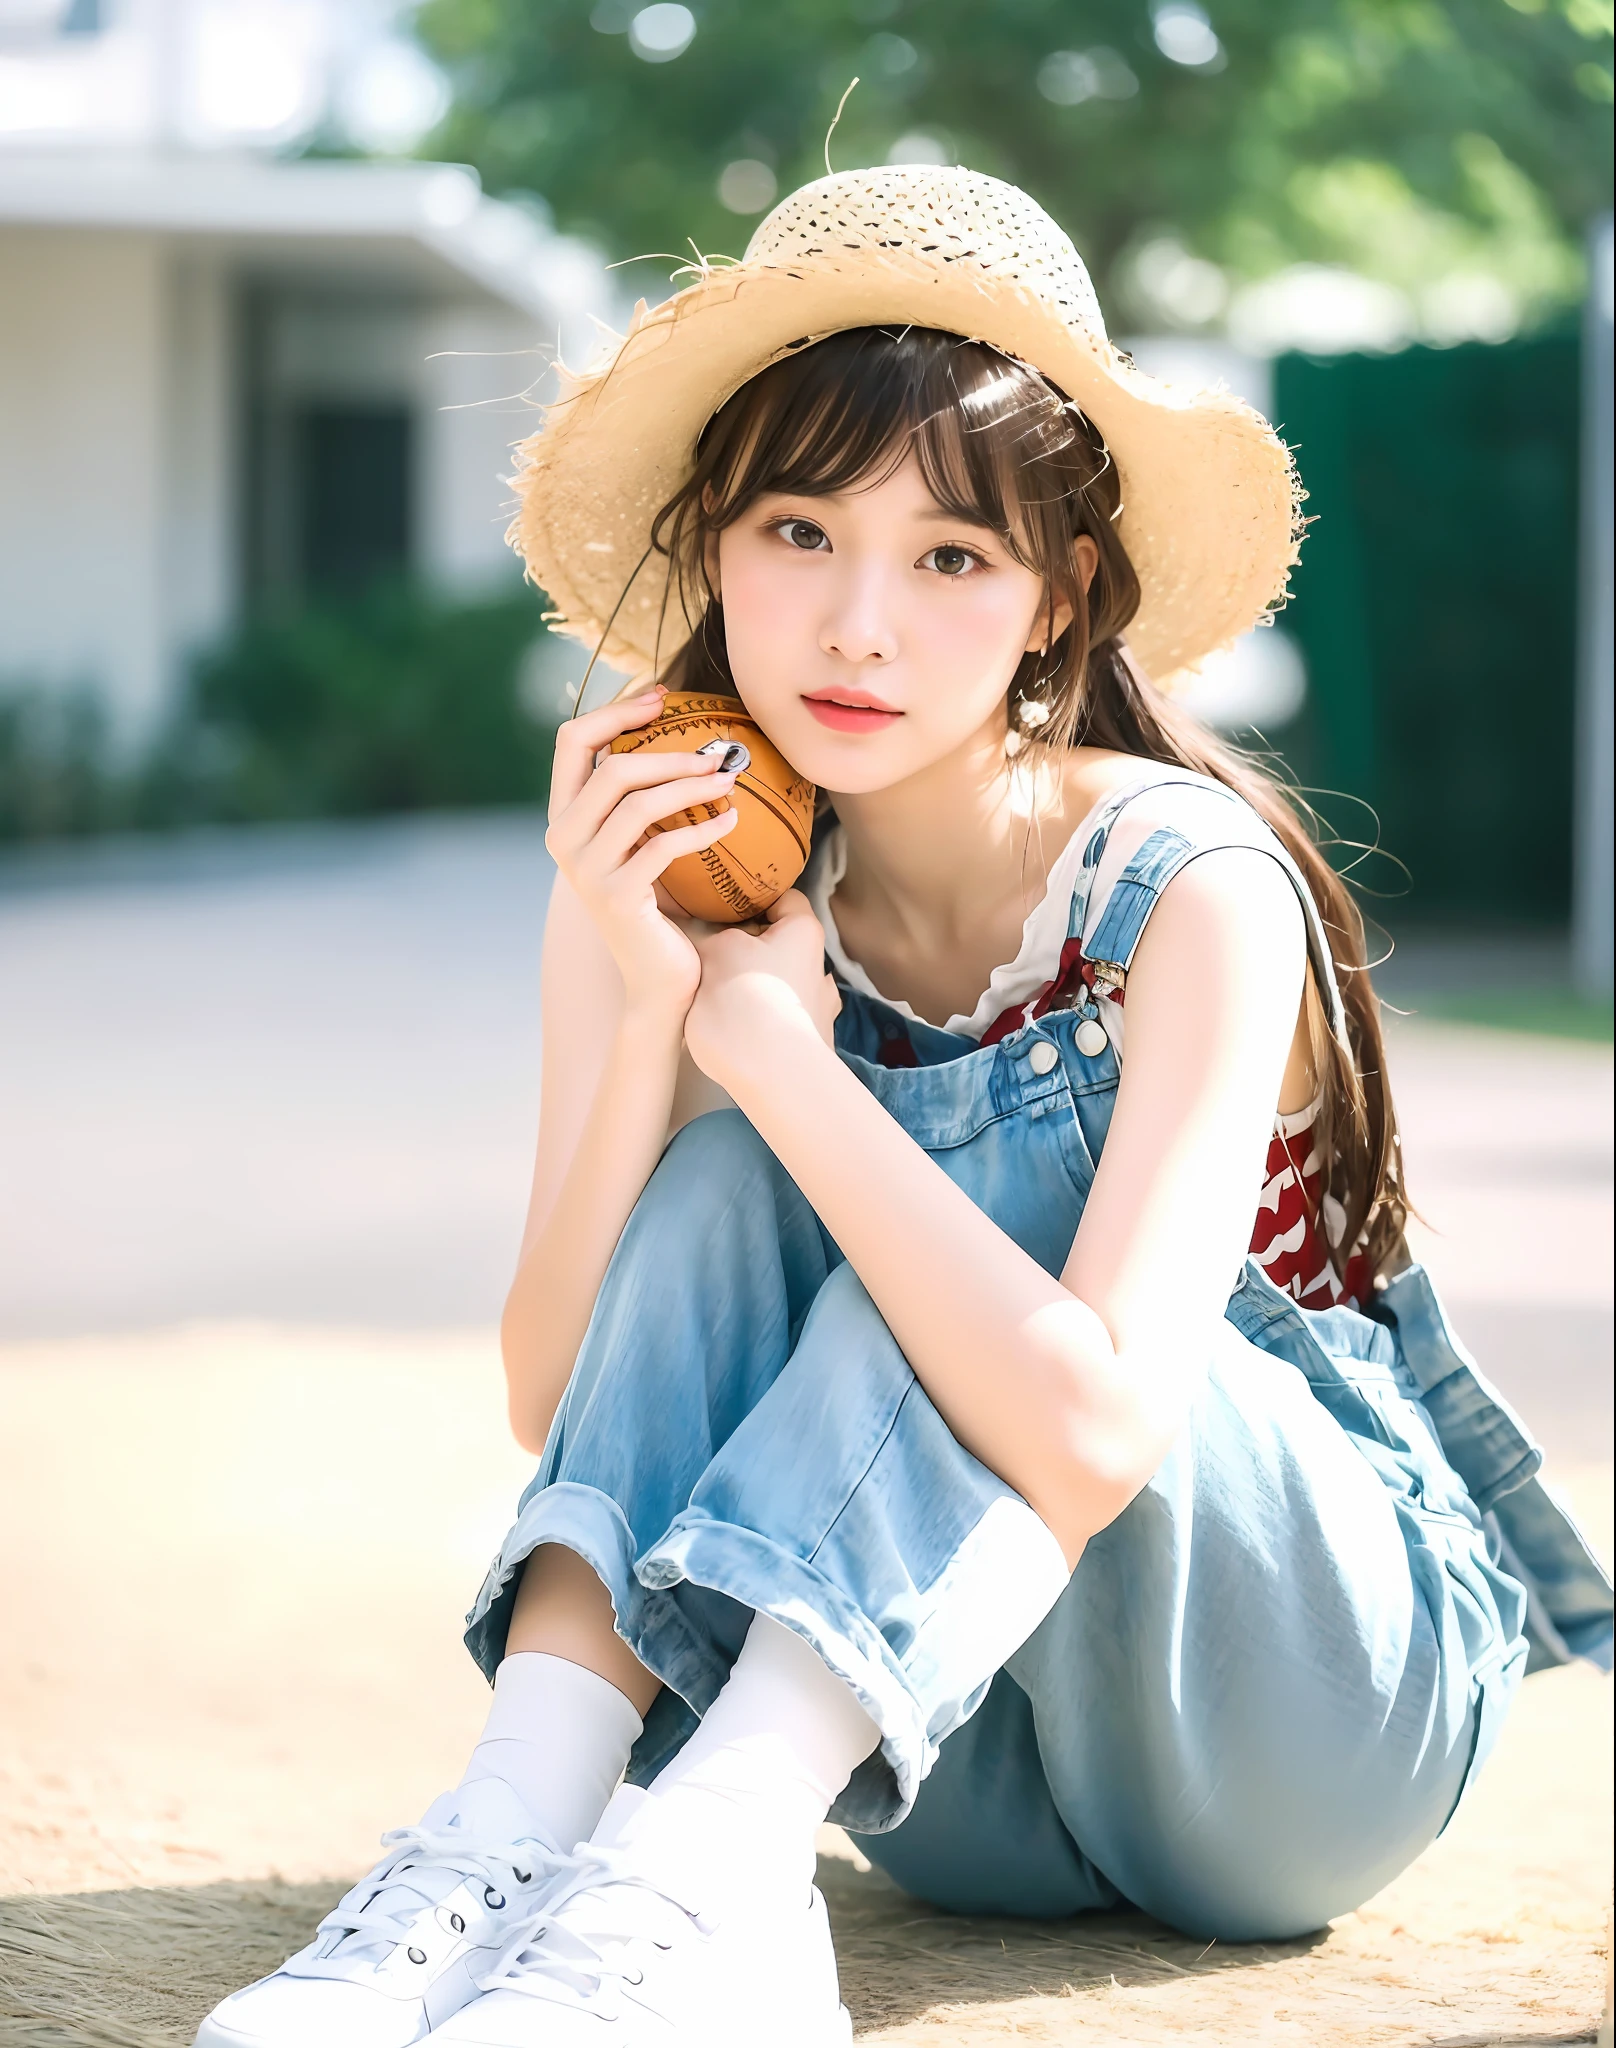 (Masterpiece)), (Best Quality), (detailed), 1 girl, 18 years old, playful expression, medium breasts, long hair, beautiful, natural, not exposed, alafi woman with baseball bat in straw hat and overalls, straw hat, a cute young woman, anime girl in real life, young cute girl in straw hat, Chinese girl, straw hat and overalls, attractive girl, cute thin face for girl, cute young woman, cute - fine face, Cute young girl